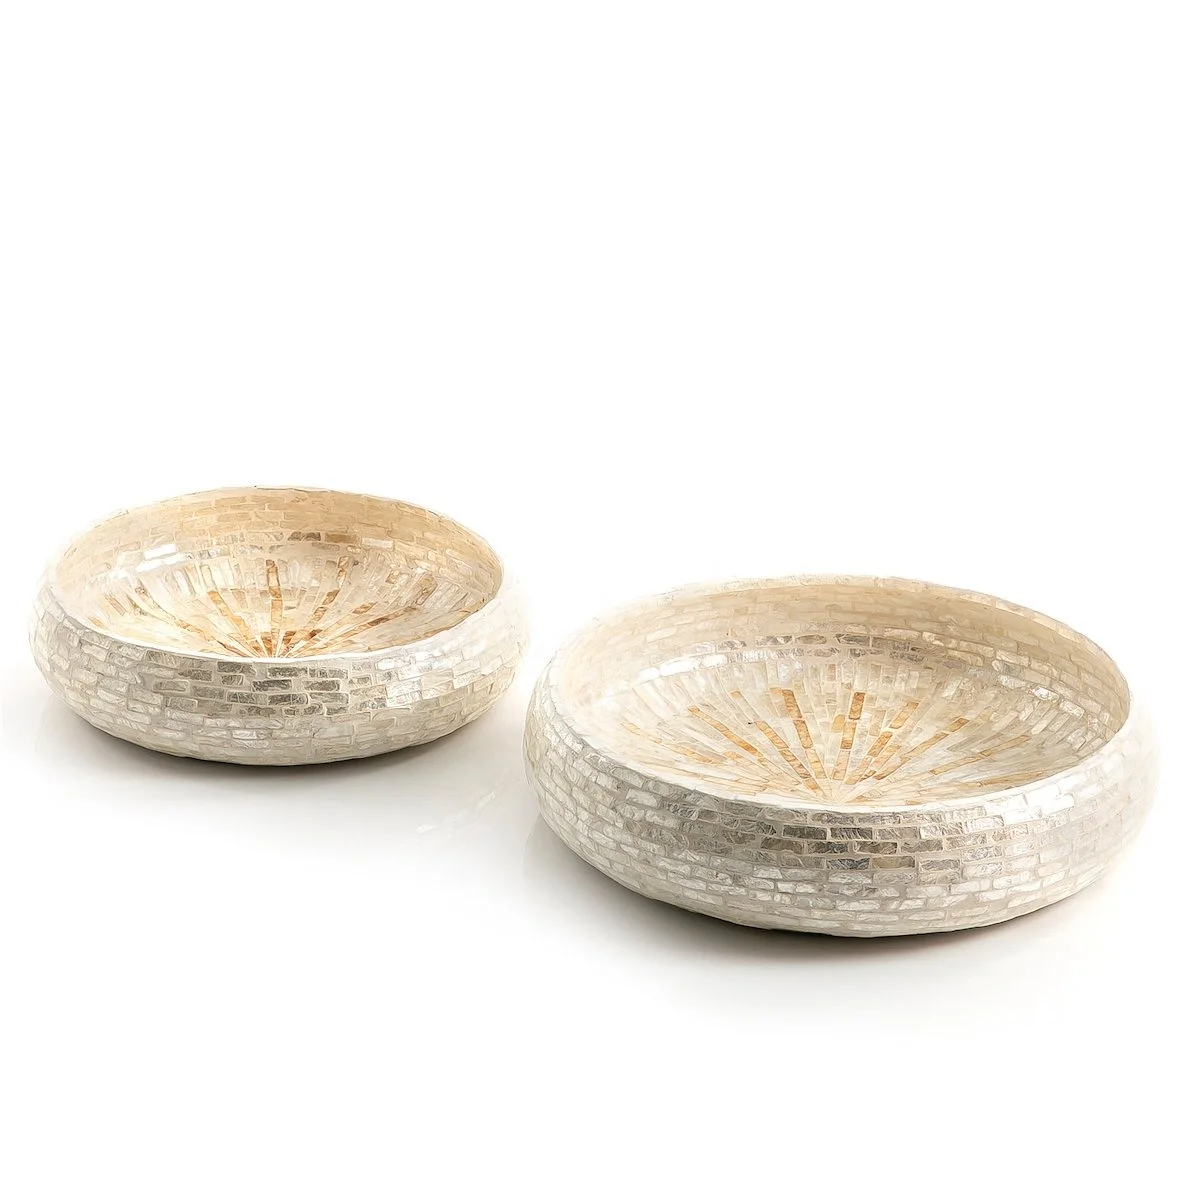 Luxury Chocolate Bowl In Mother Of Pearl Inlaid Round Seashell Bowls ...